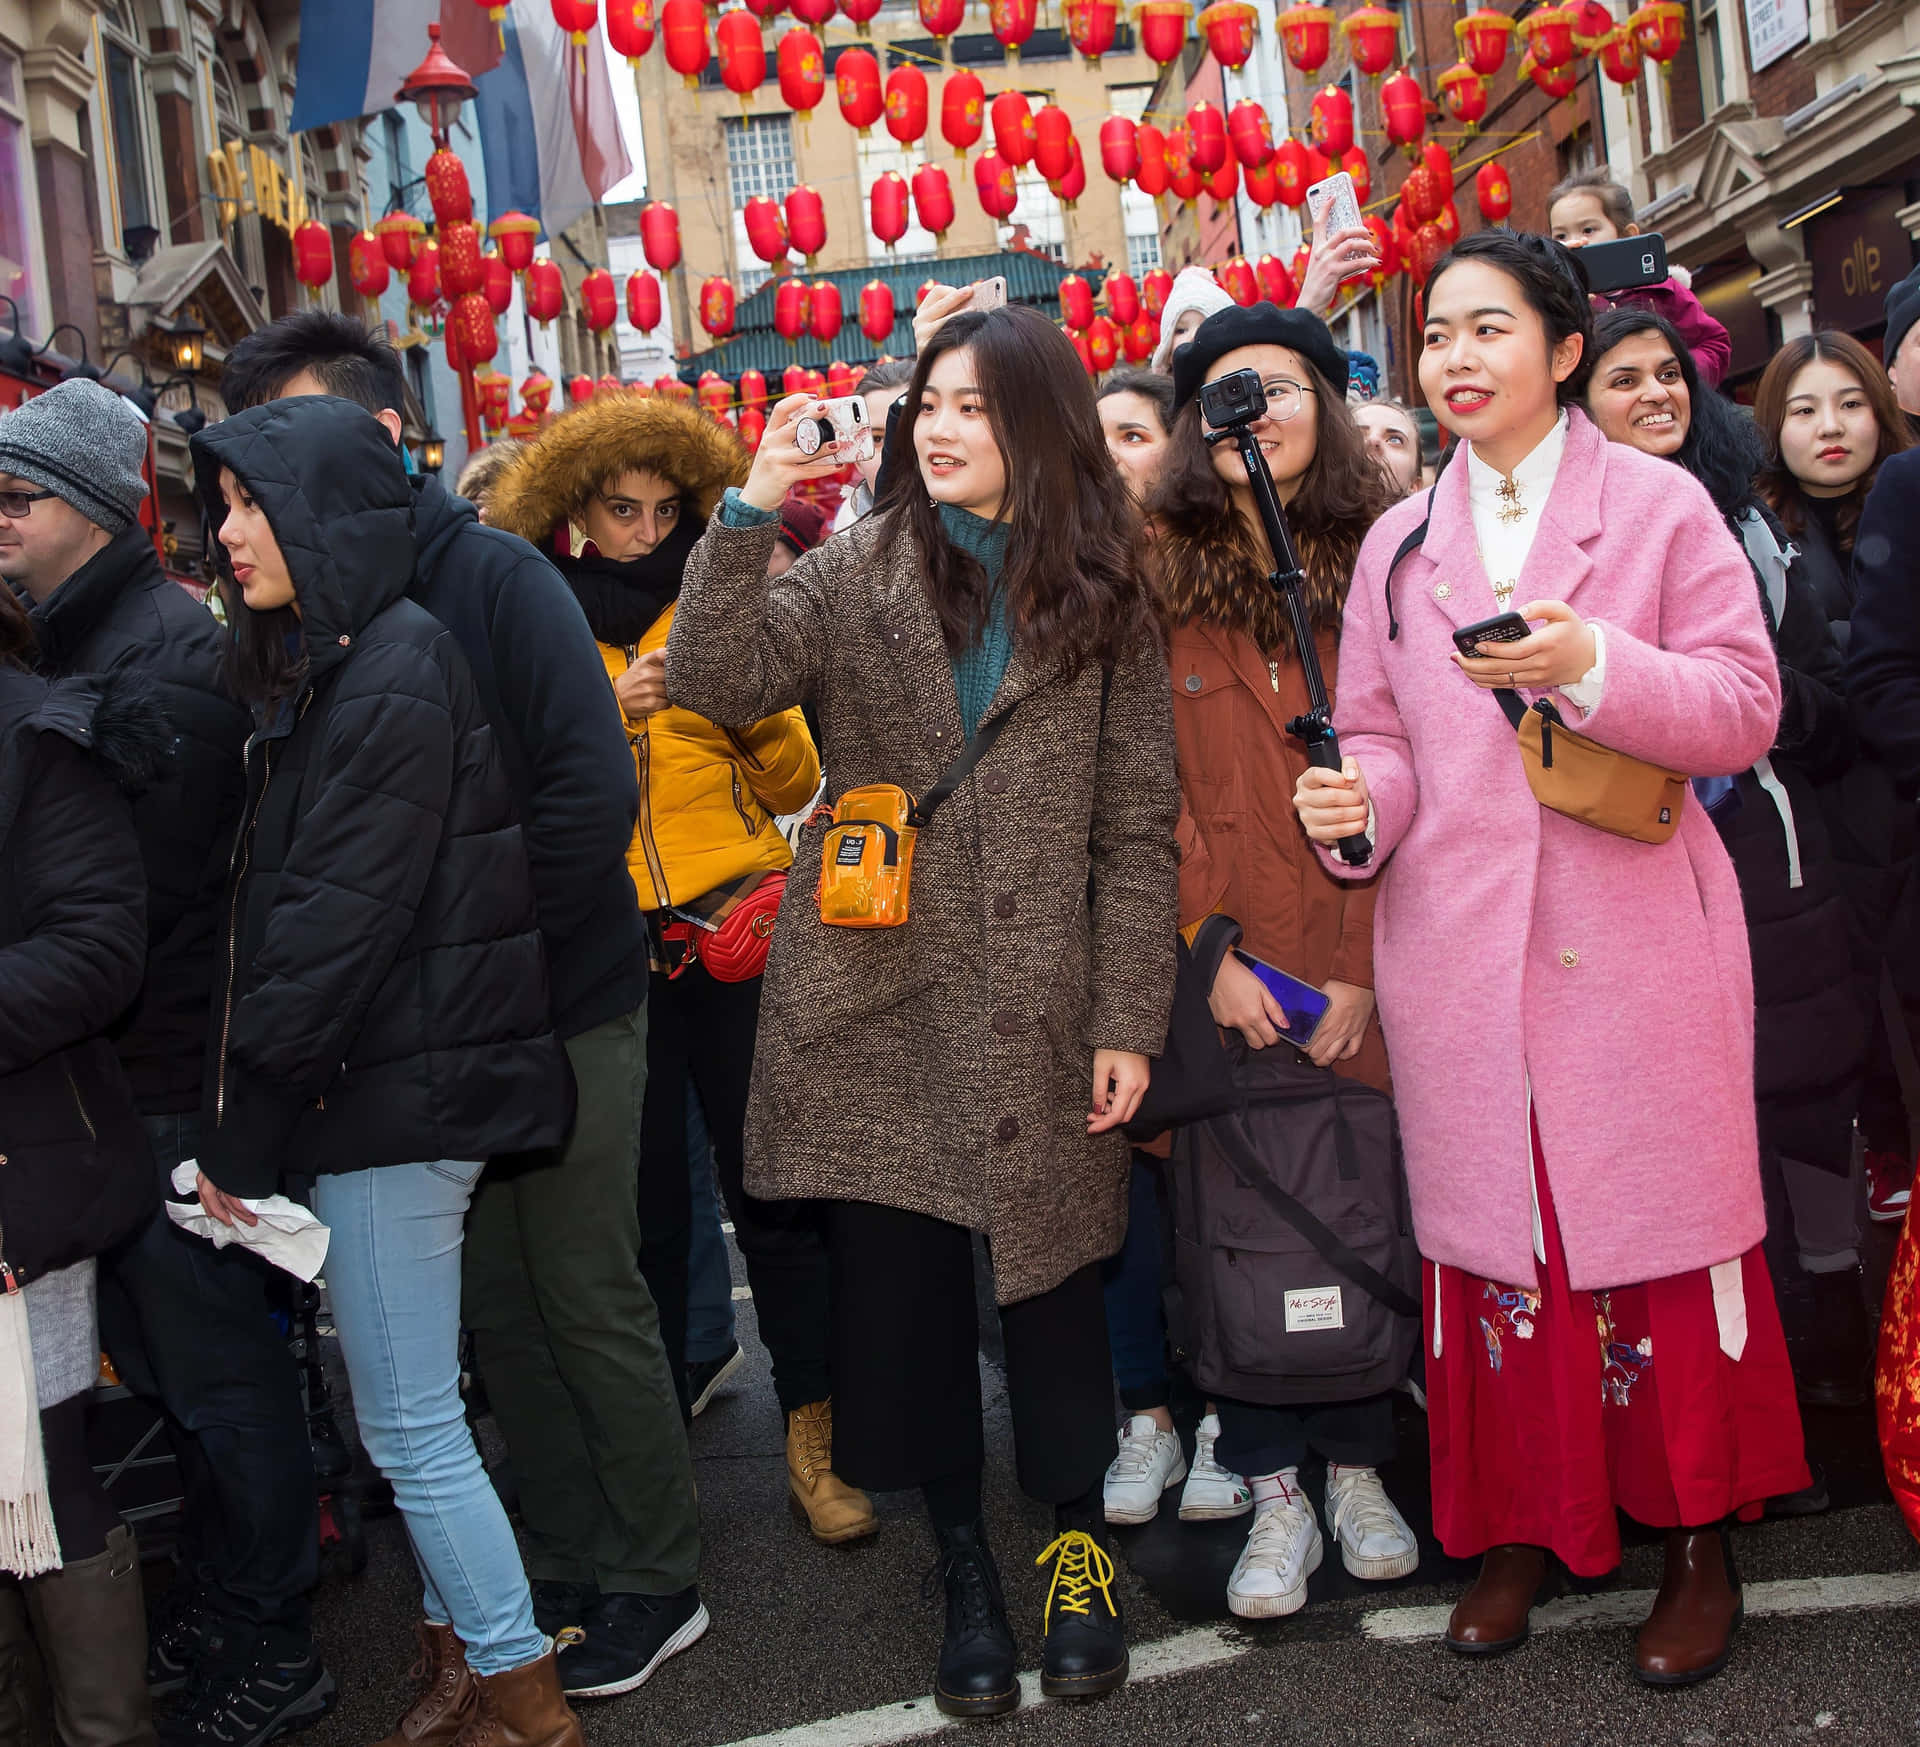 Vibrant Chinese New Year Celebration with Lanterns and Dragons